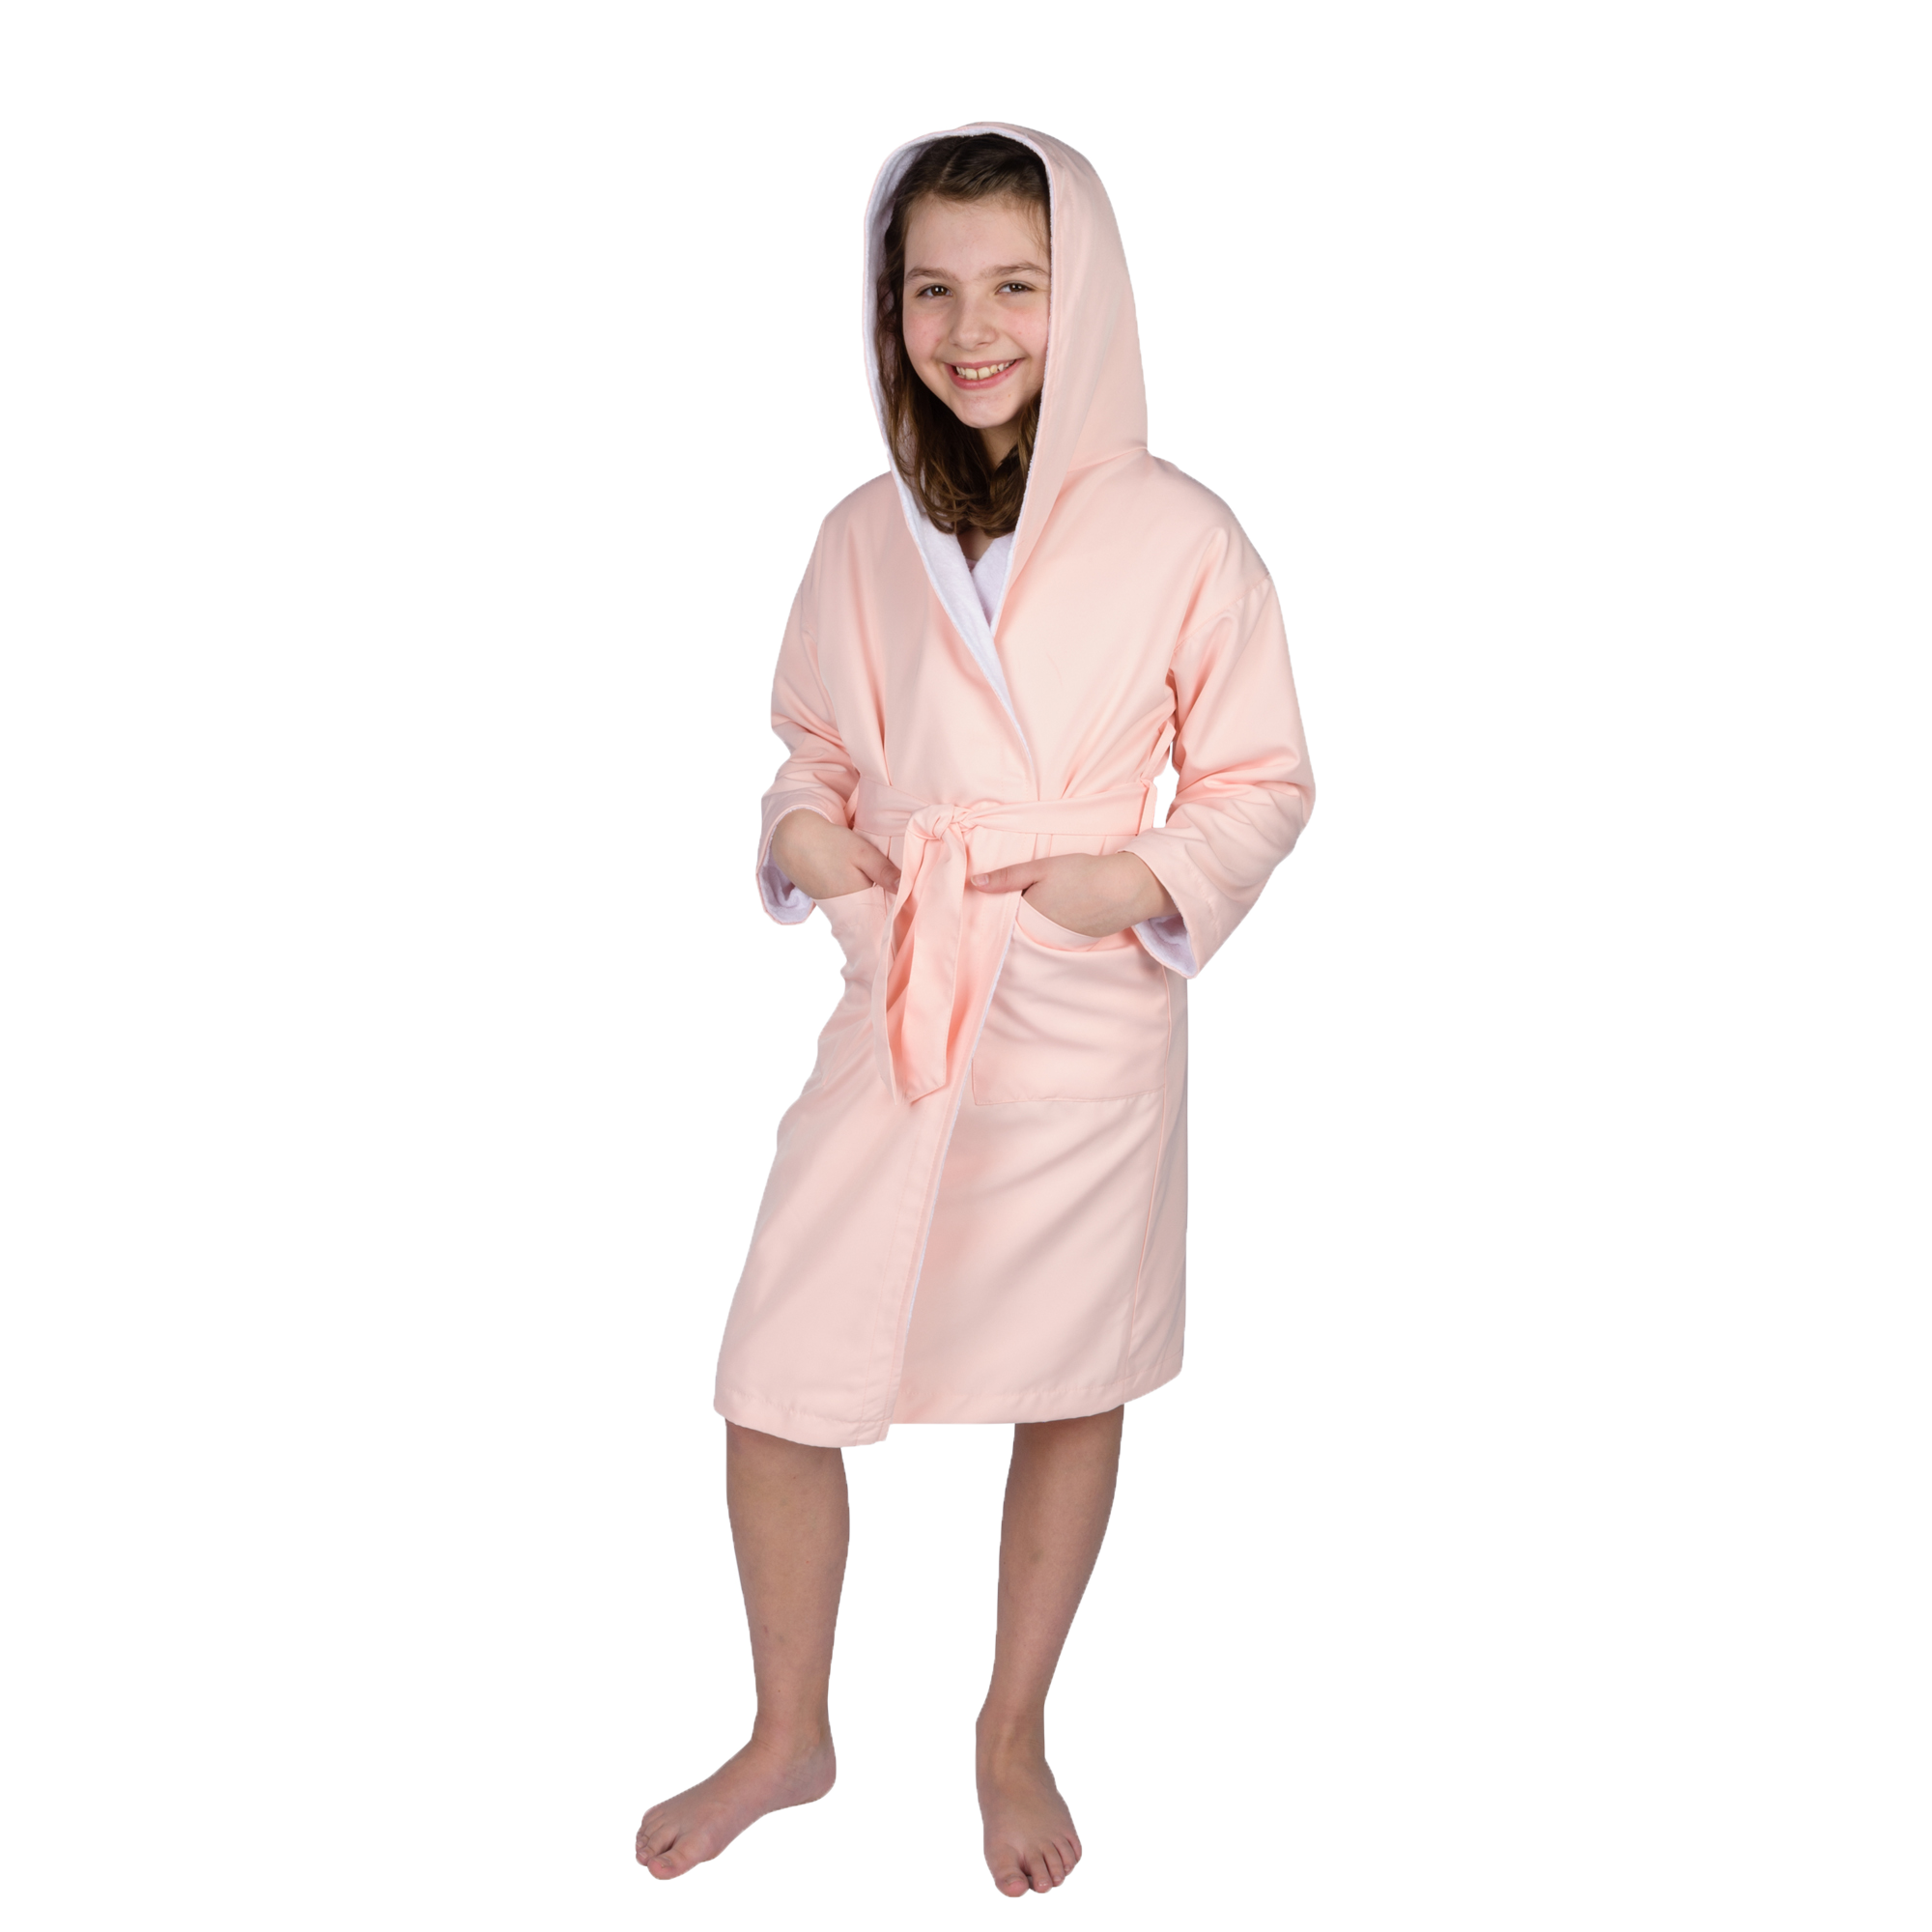 Luxury Pink Hooded Bathrobe for Girls - Soft, Plush - Made in USA ...